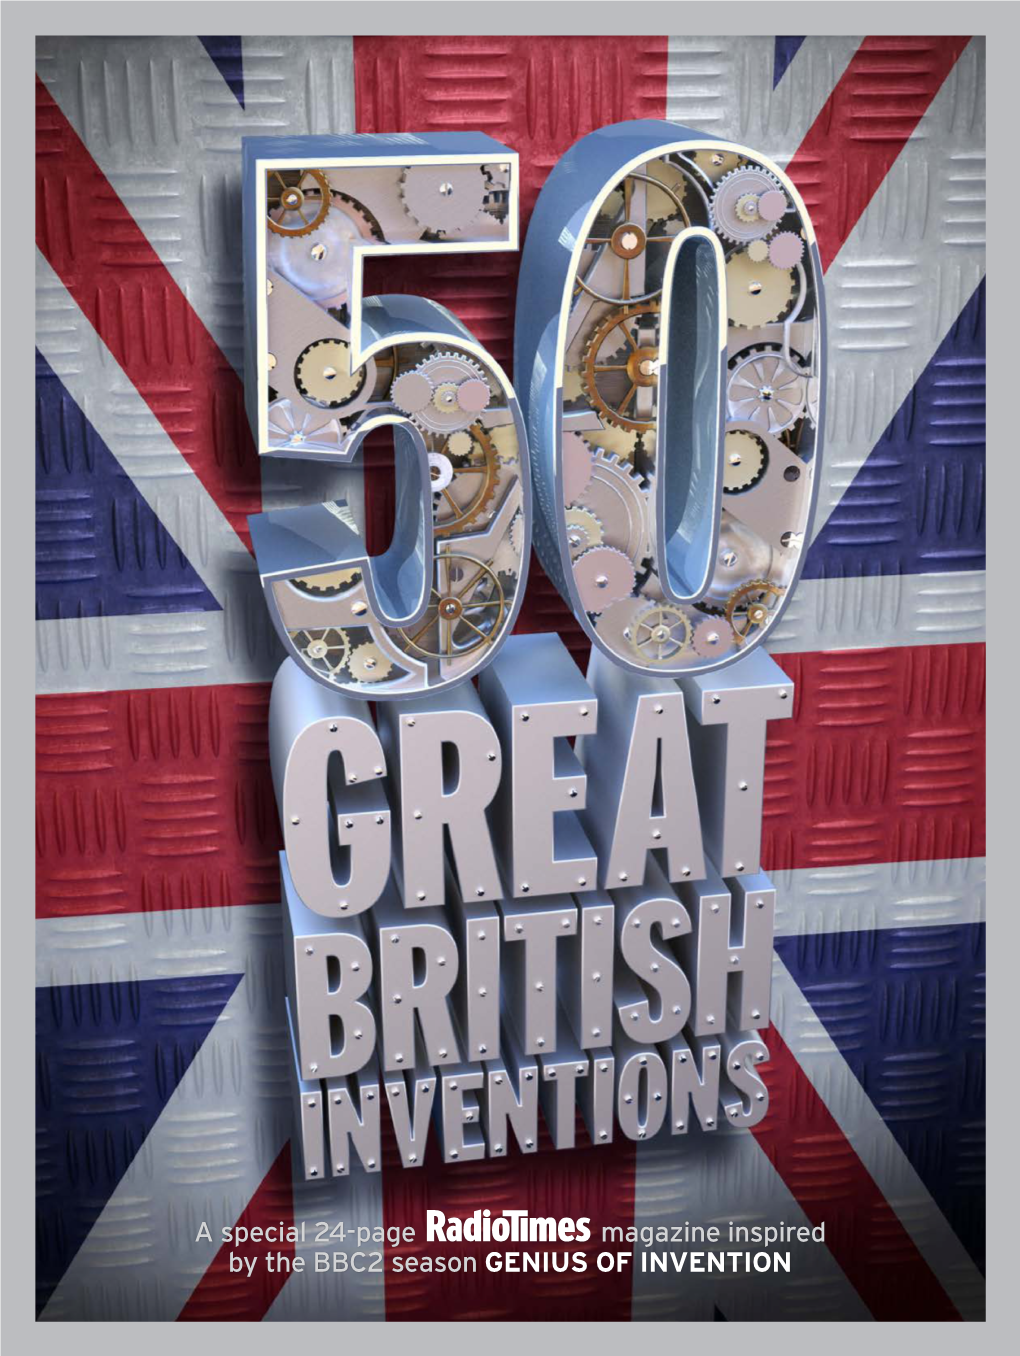 A Special 24-Page (Magazine Inspired by the BBC2 Season GENIUS OF